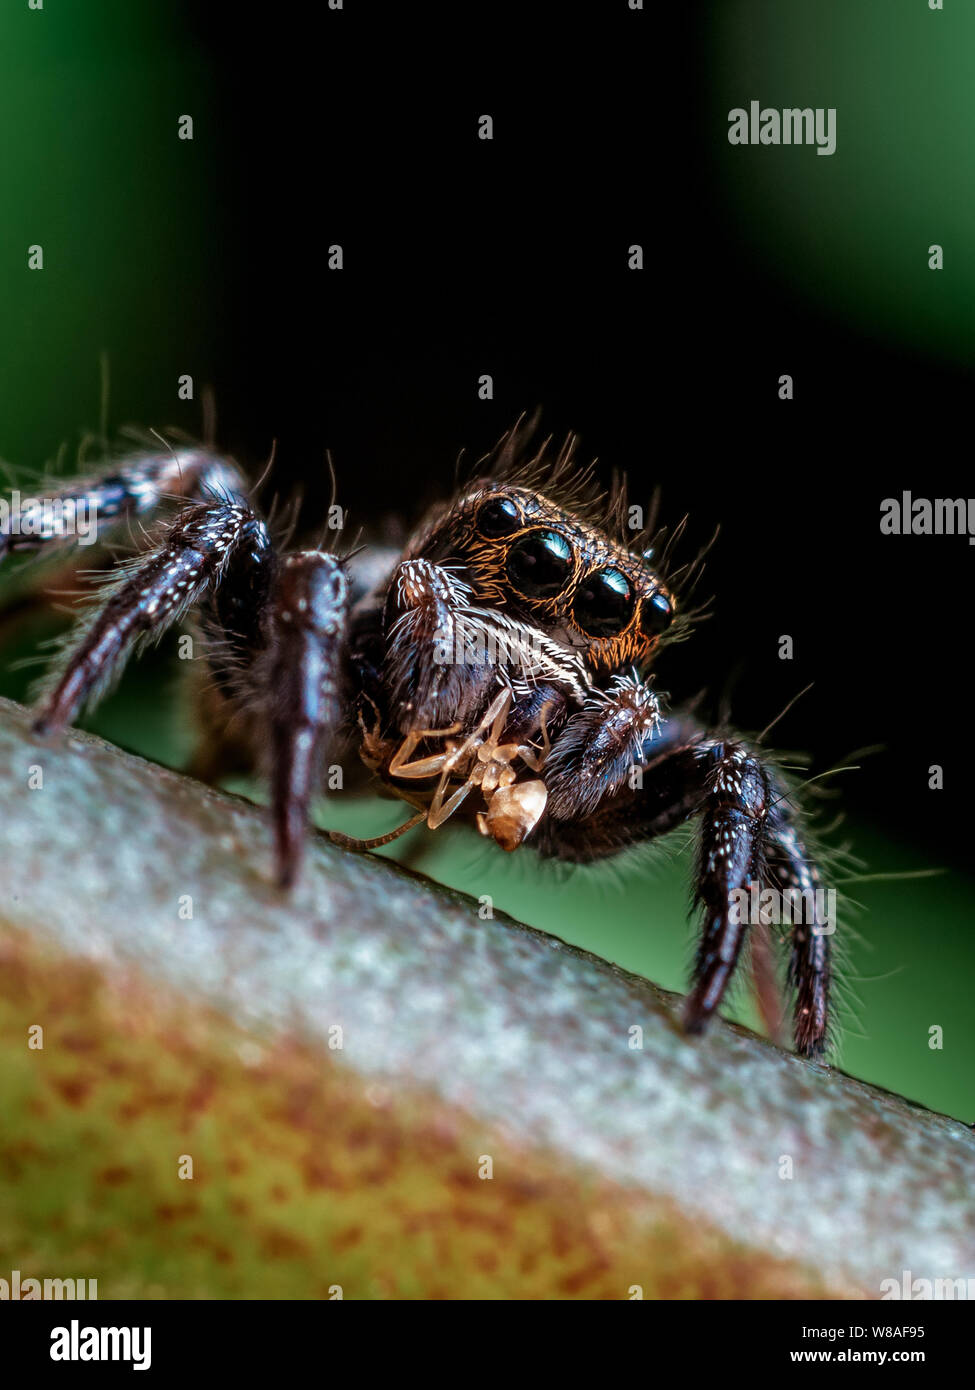 Jumping spider feeding on an ant, close-up with eye details visible Stock Photo